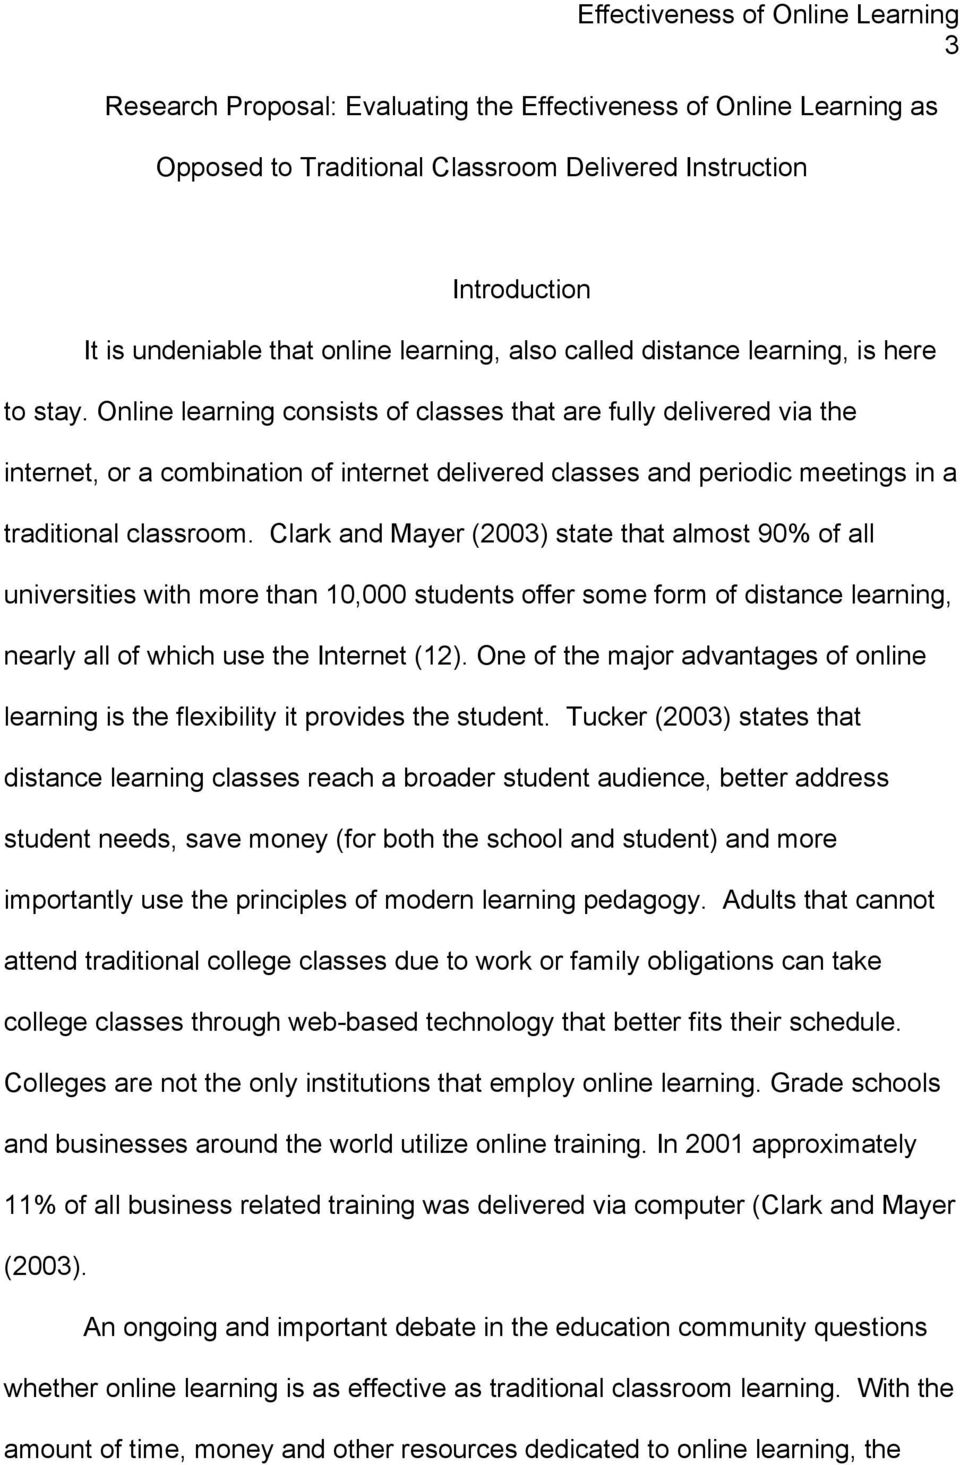 Research Proposal Evaluating The Effectiveness Of Online Learning